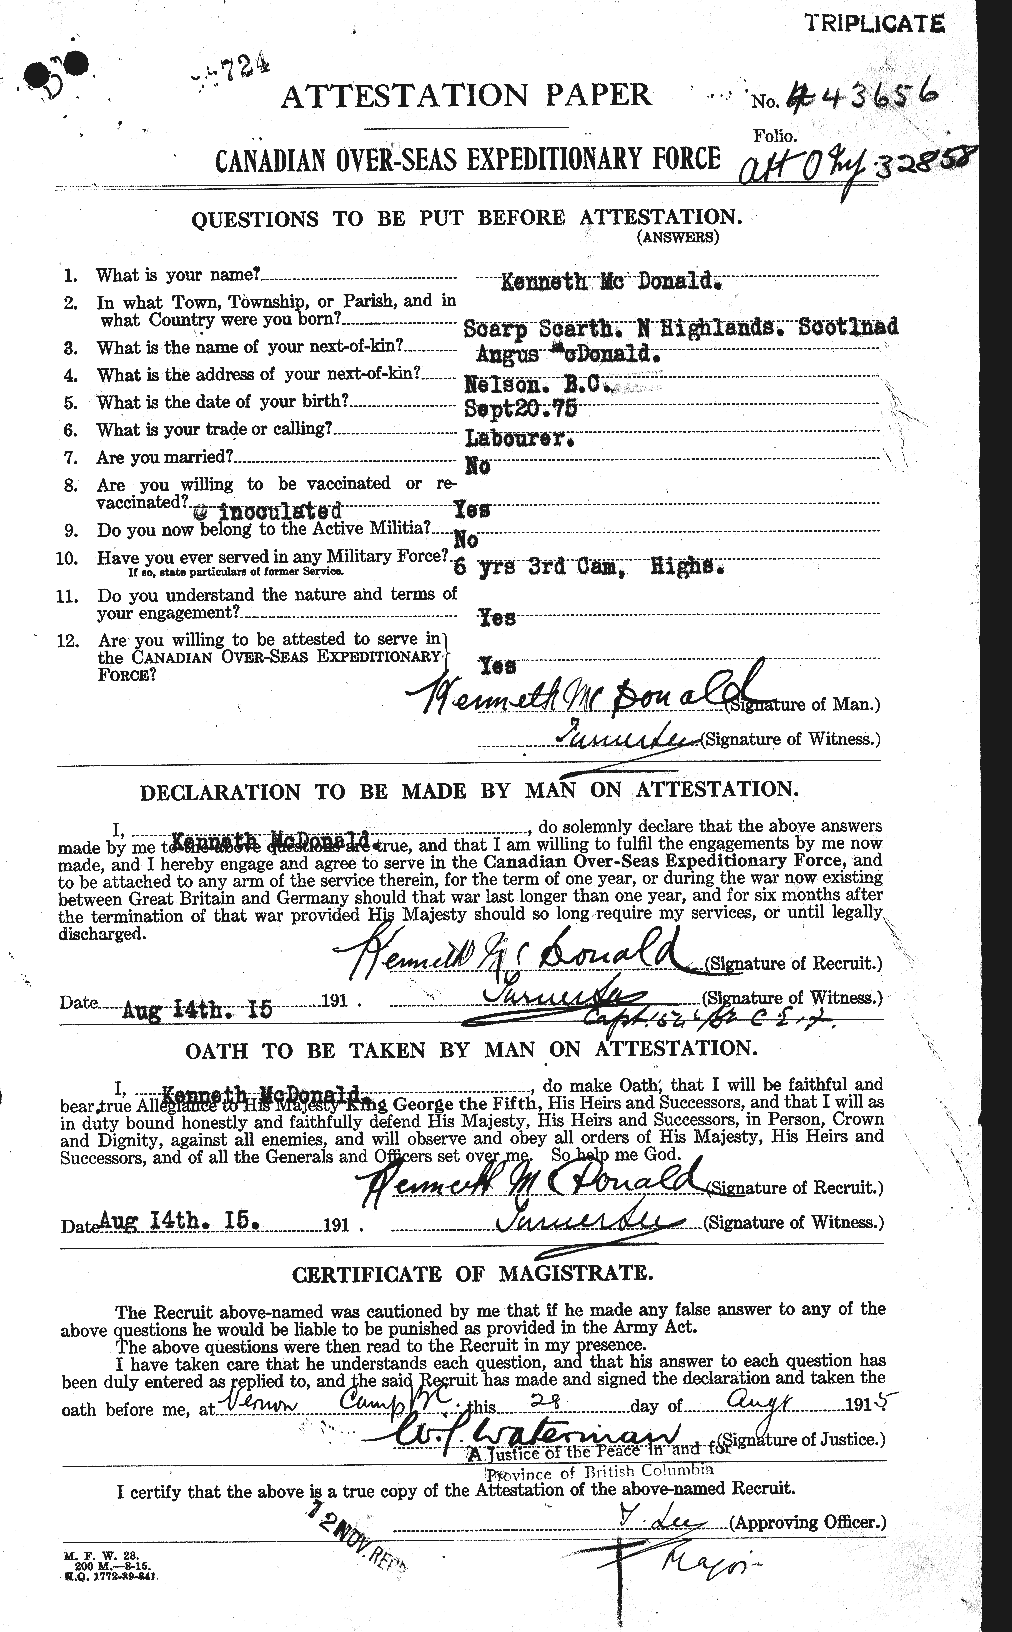 Personnel Records of the First World War - CEF 519713a